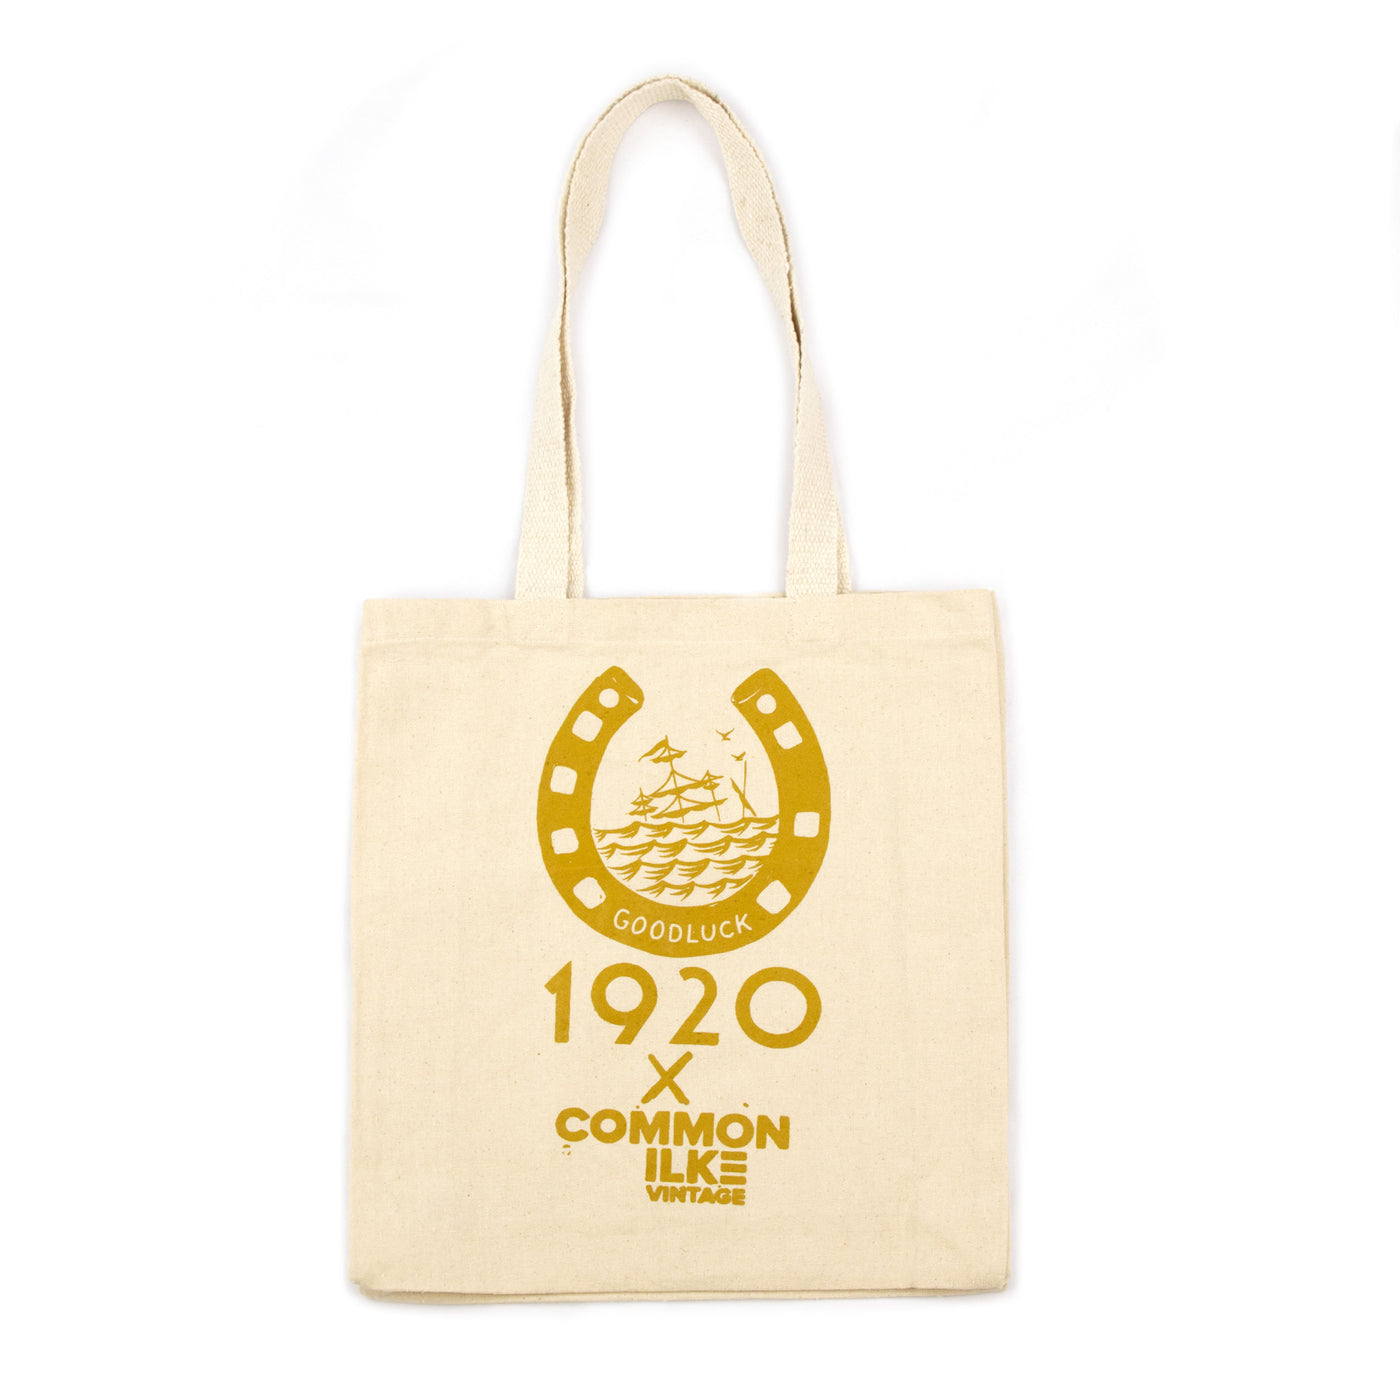 1920 Tattoo X COMMON ILKE VINTAGE Good Luck Gold Tote Bag